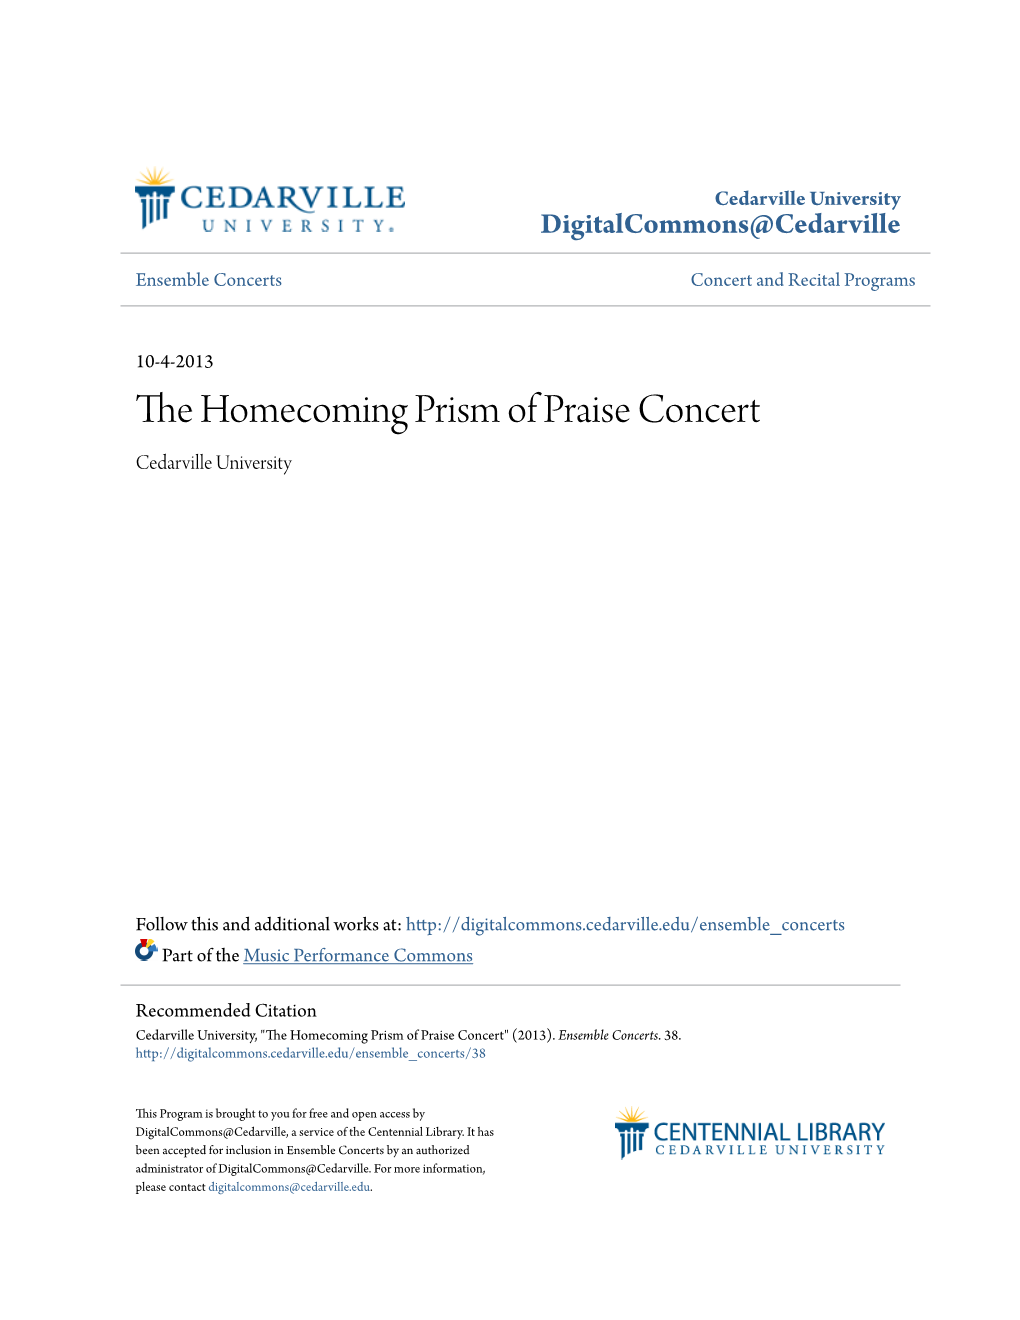 The Homecoming Prism of Praise Concert